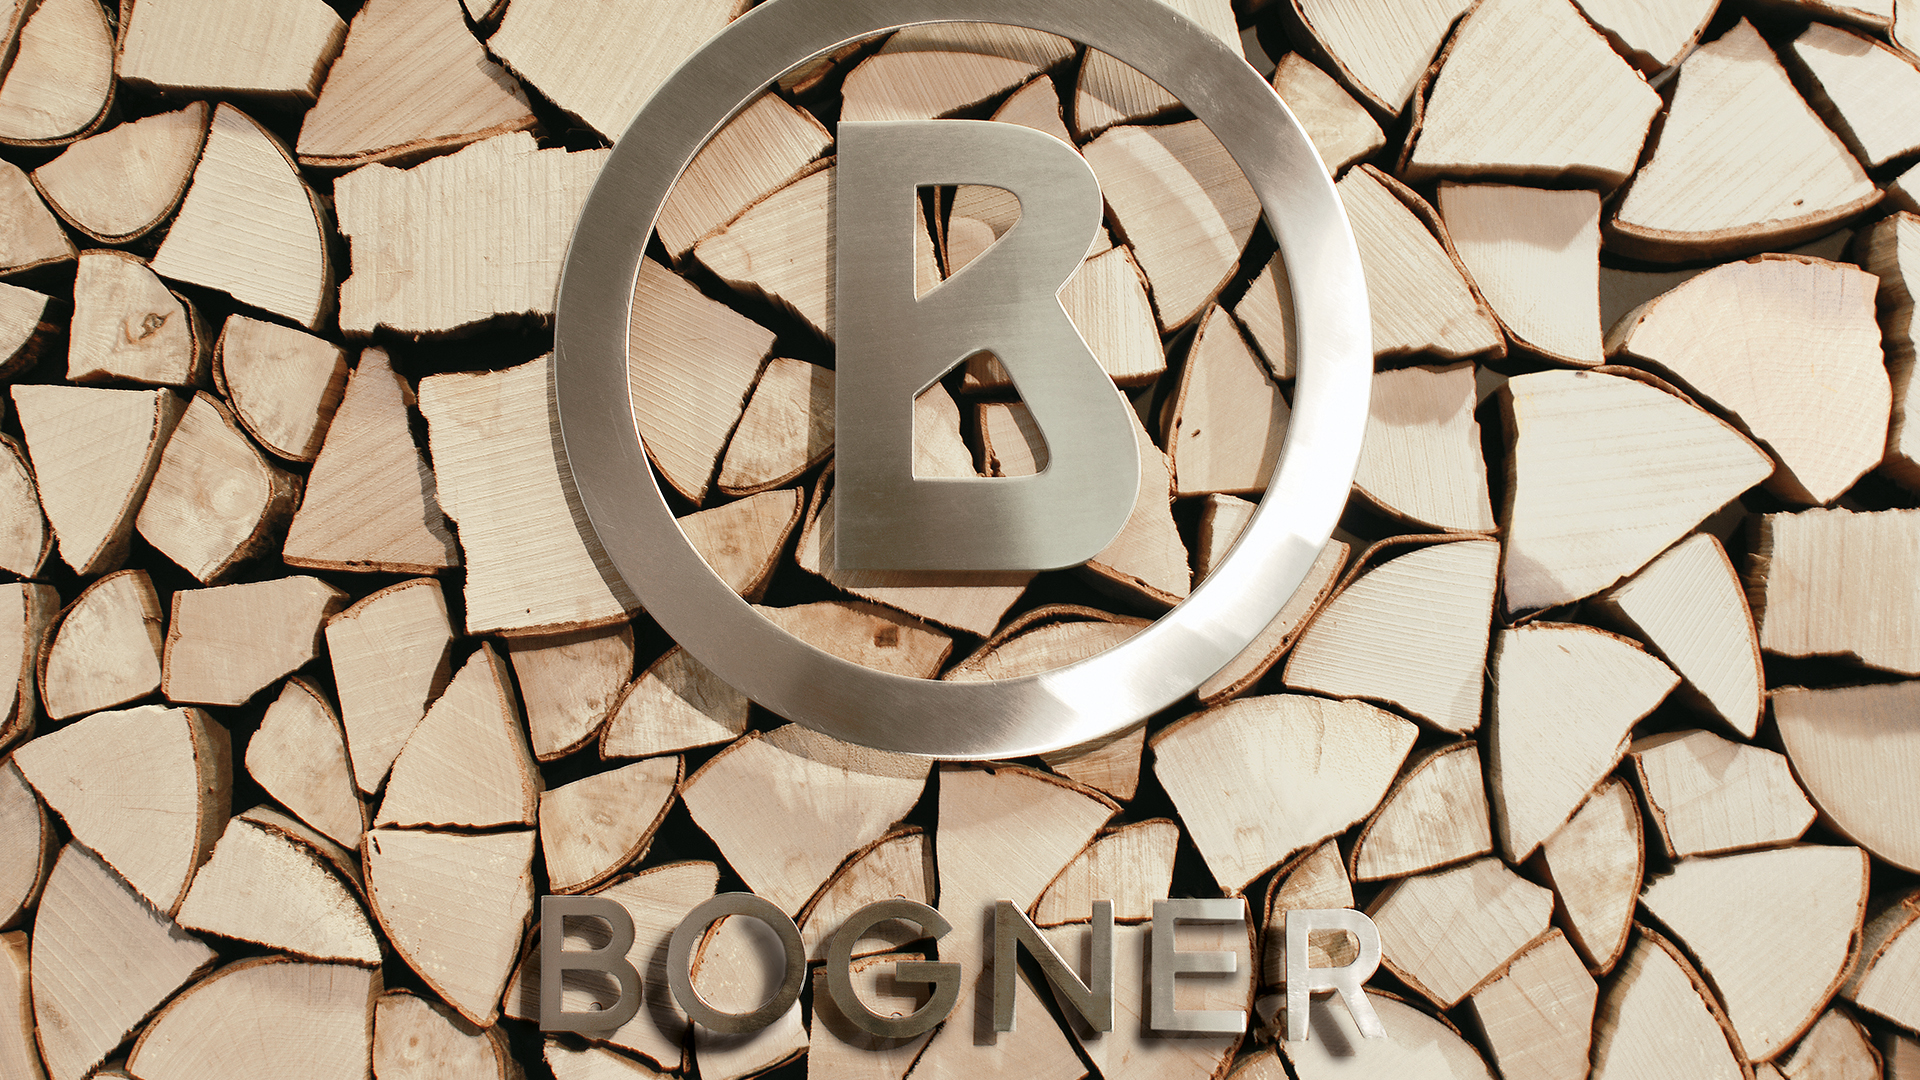 Dart stages the shop concept for Bogner for the Outlet Stores 2010